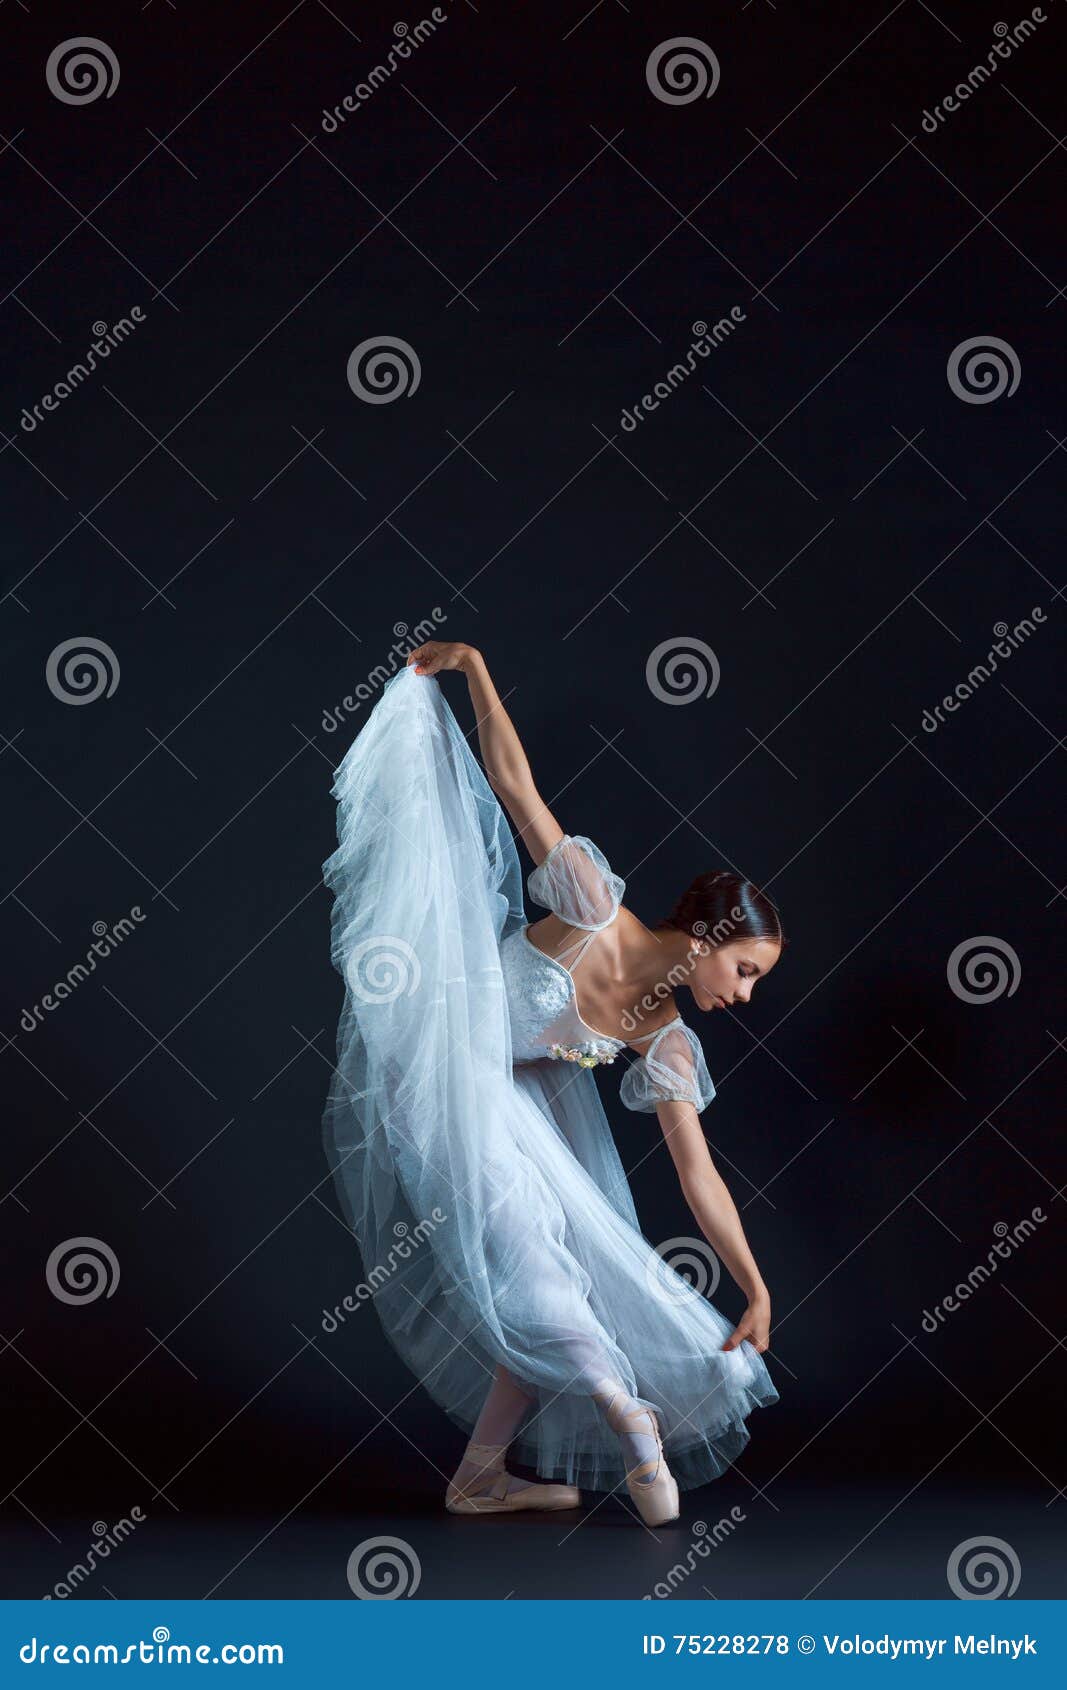 Portrait of the Classical Ballerina in White Dress on Black Background ...